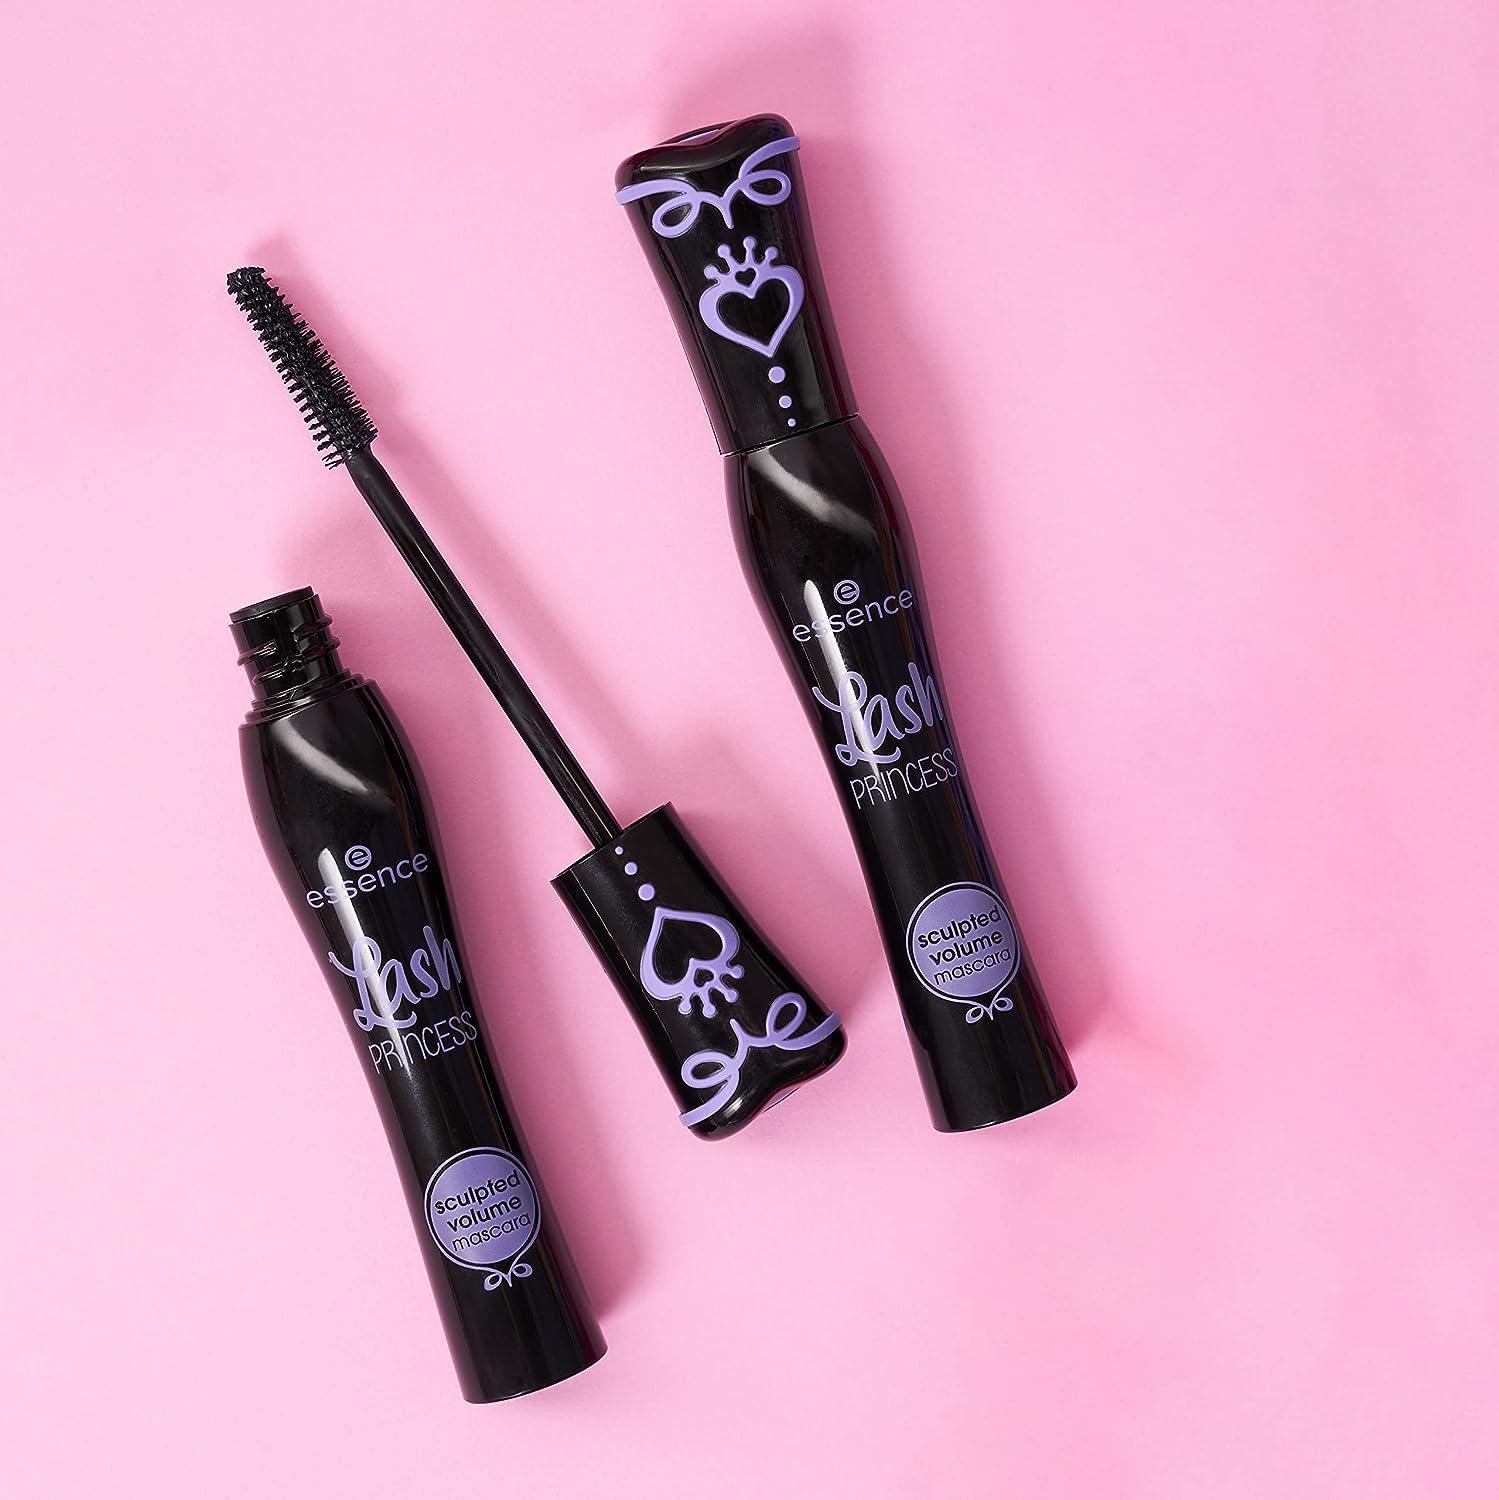 essence | Lash Princess Sculpted Volume Mascara | Paraben Free | Cruelty  Free - Black (3-count) 1 Count (Pack of 1)